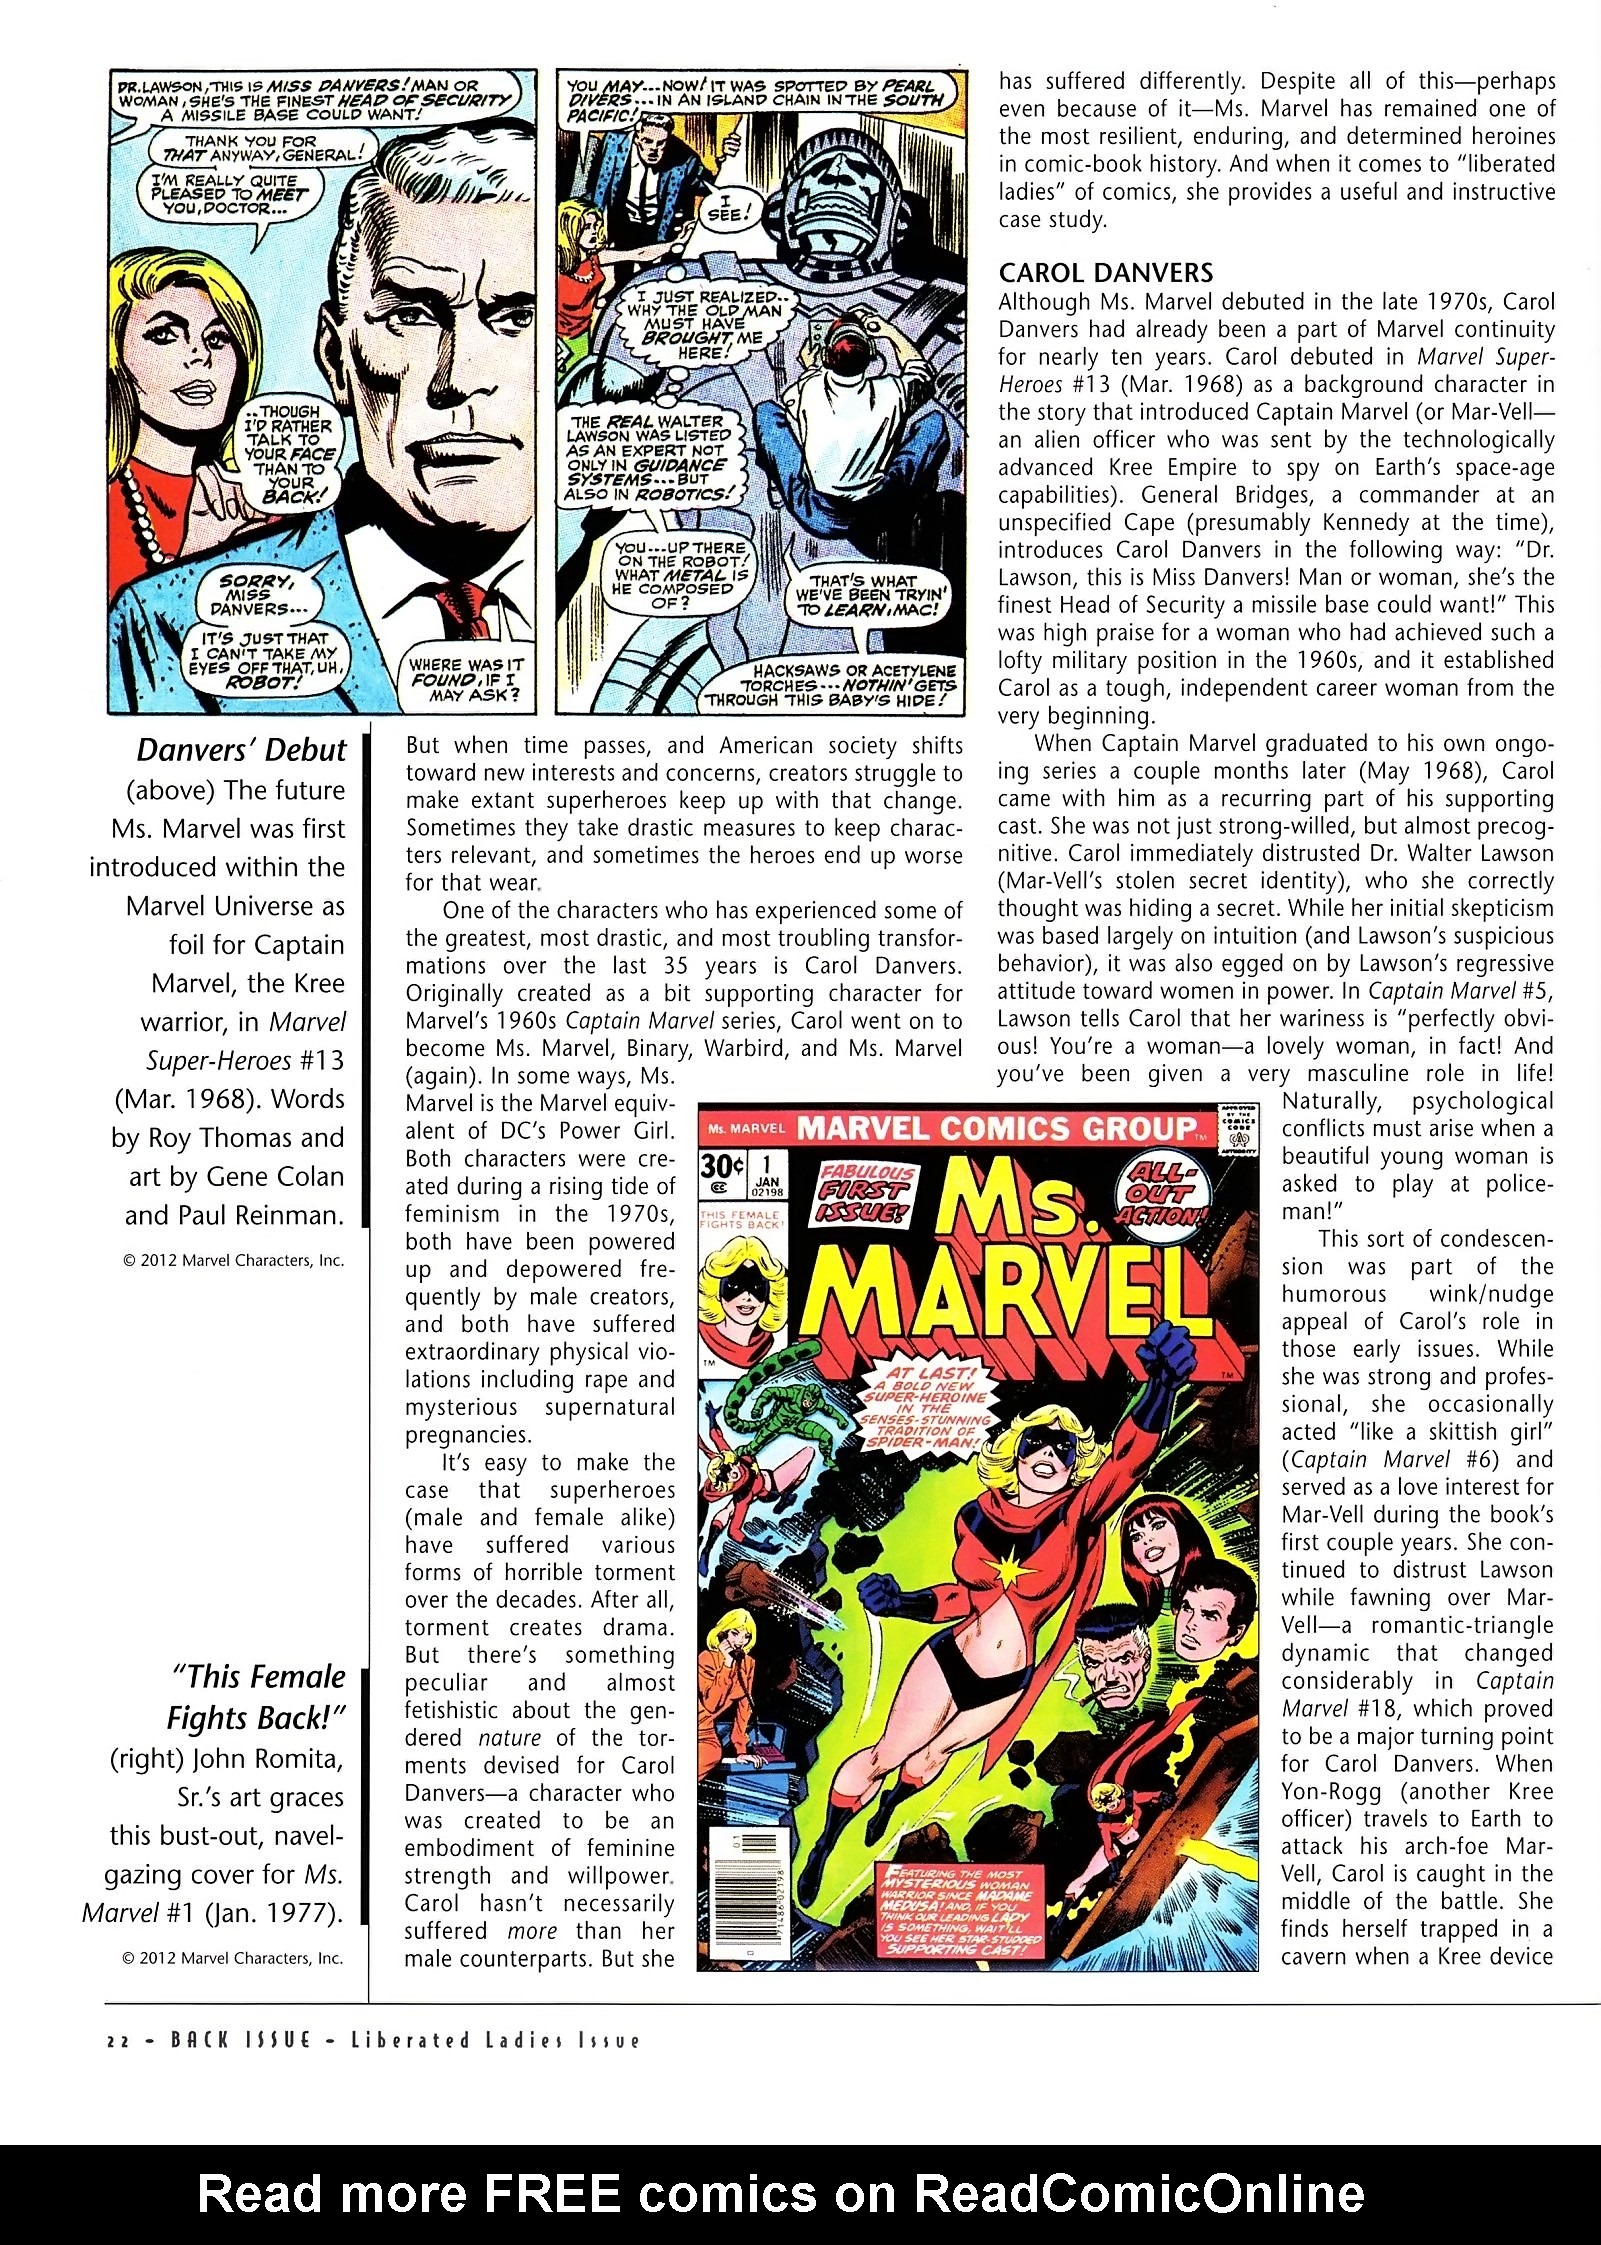 Read online Back Issue comic -  Issue #54 - 22